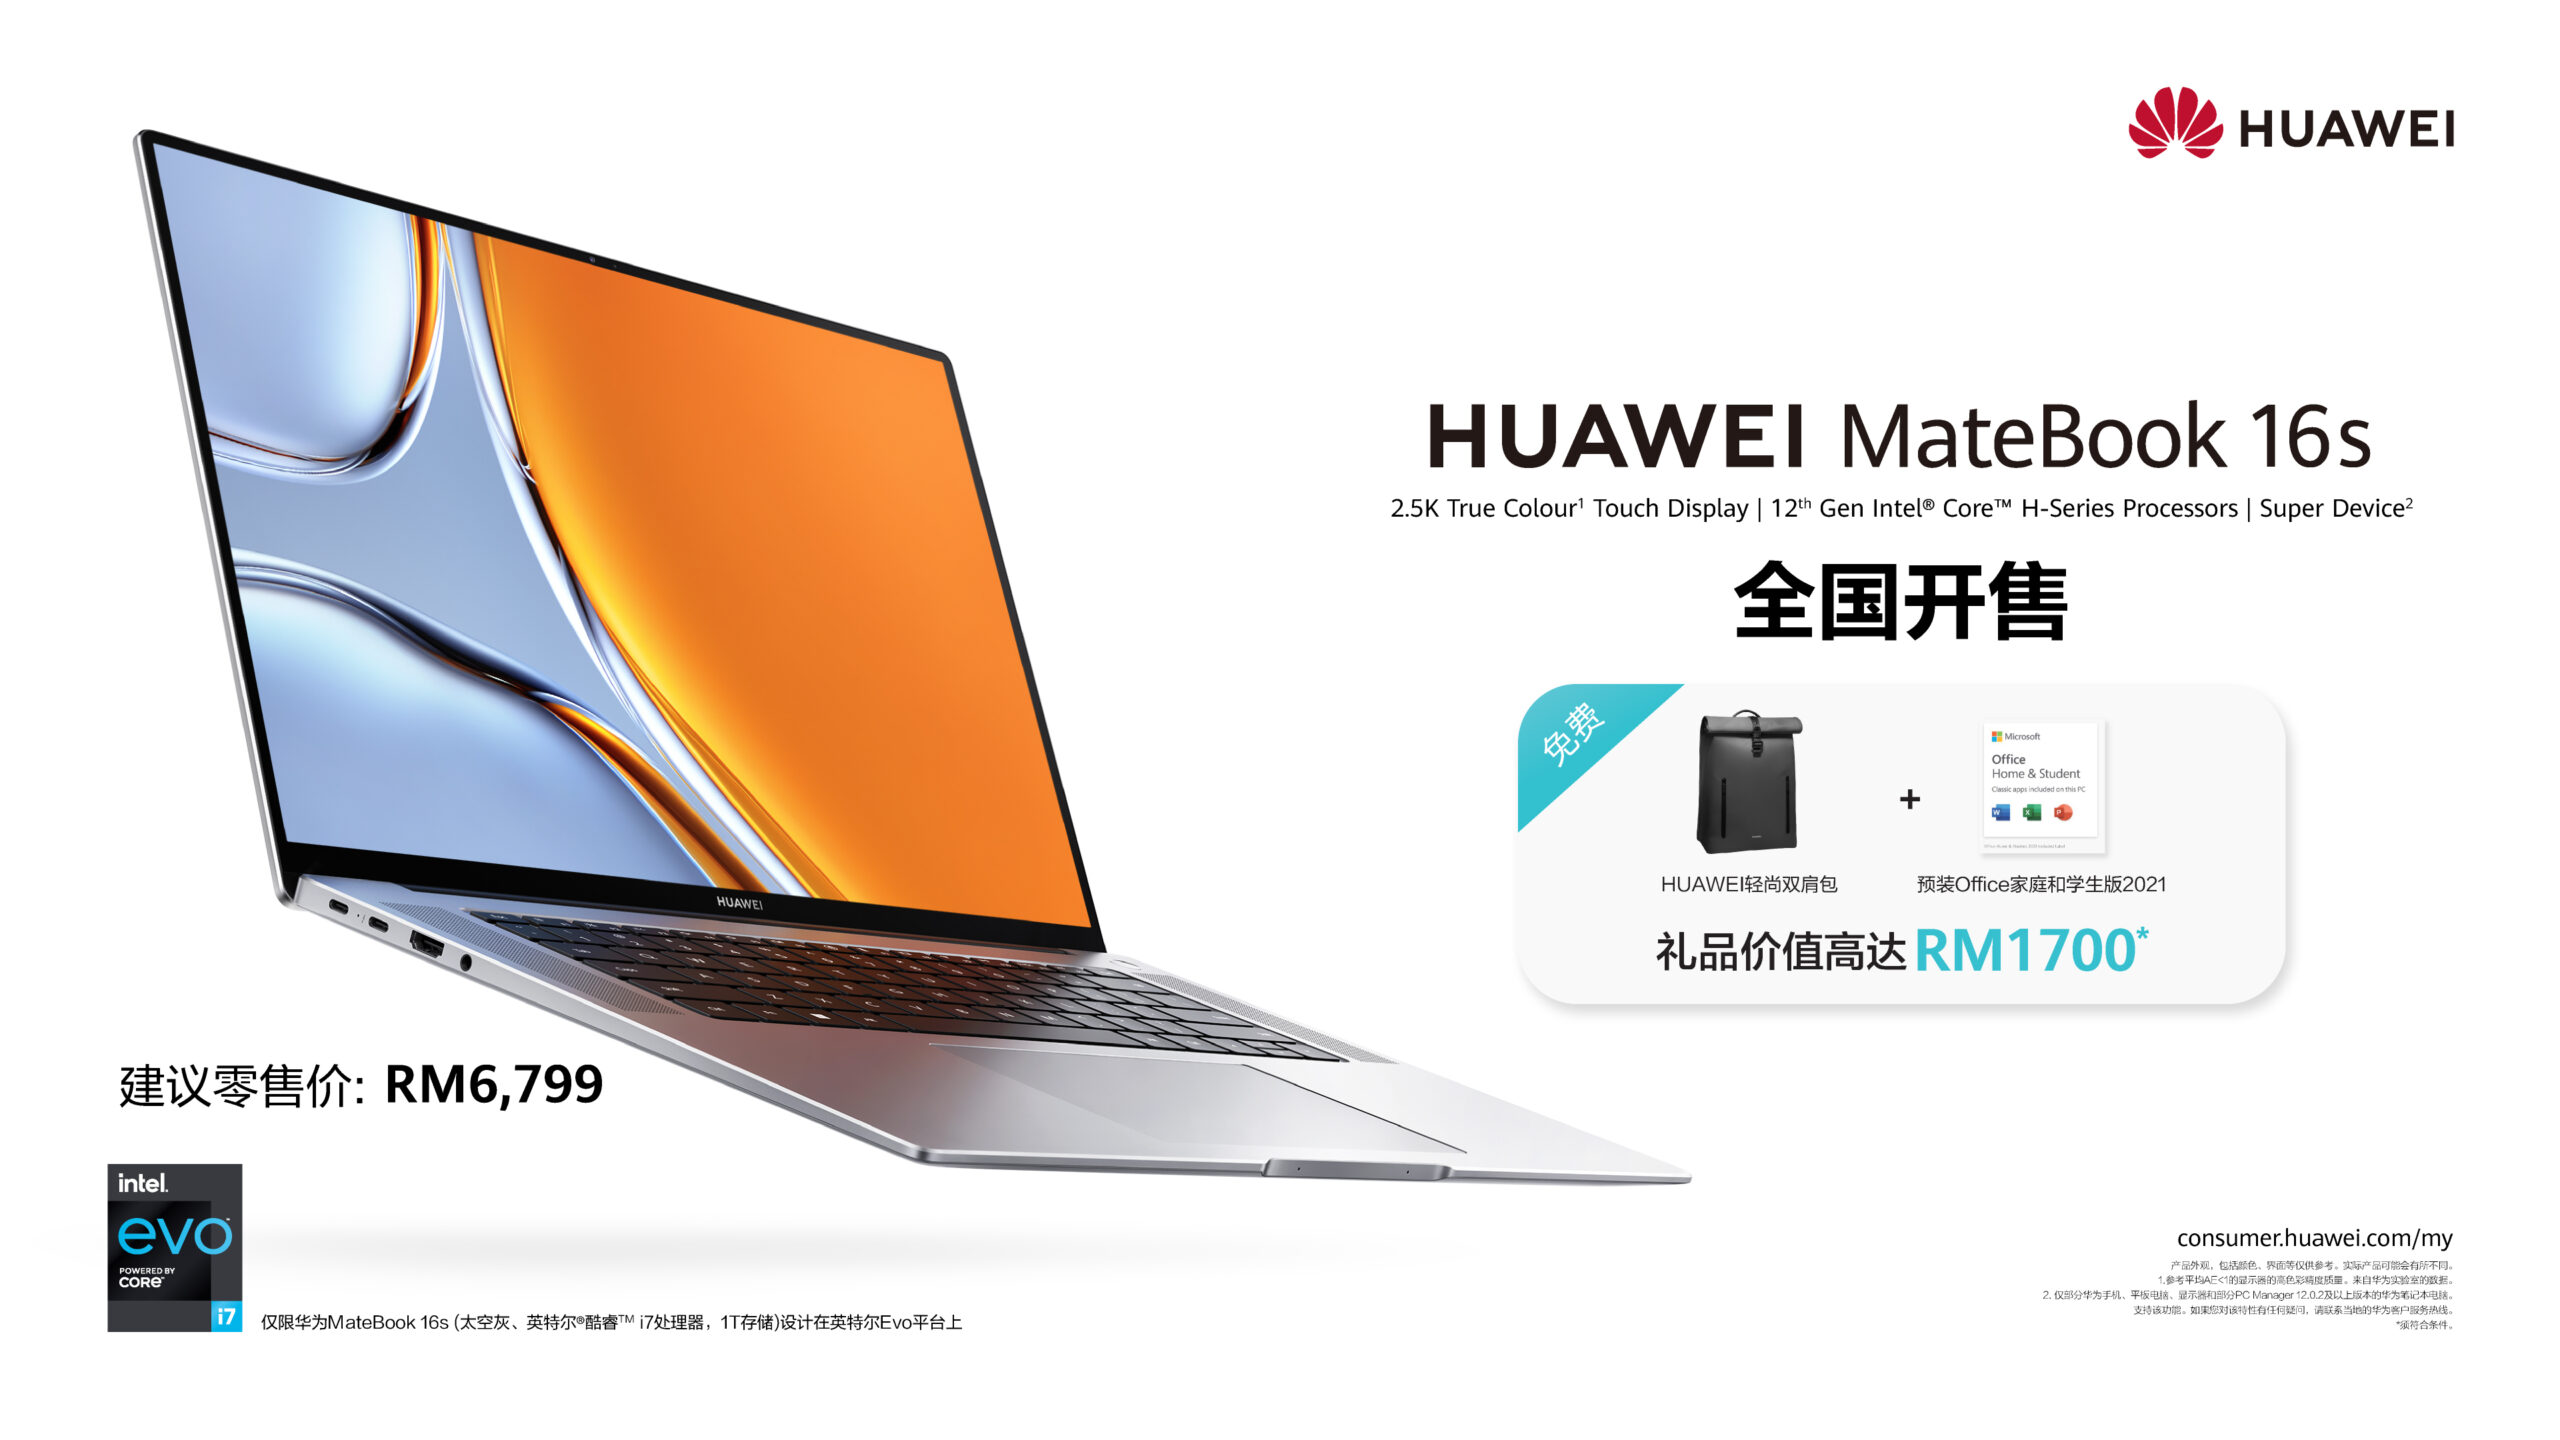 HUAWEI MateBook 16 s 现已全国开售！ scaled